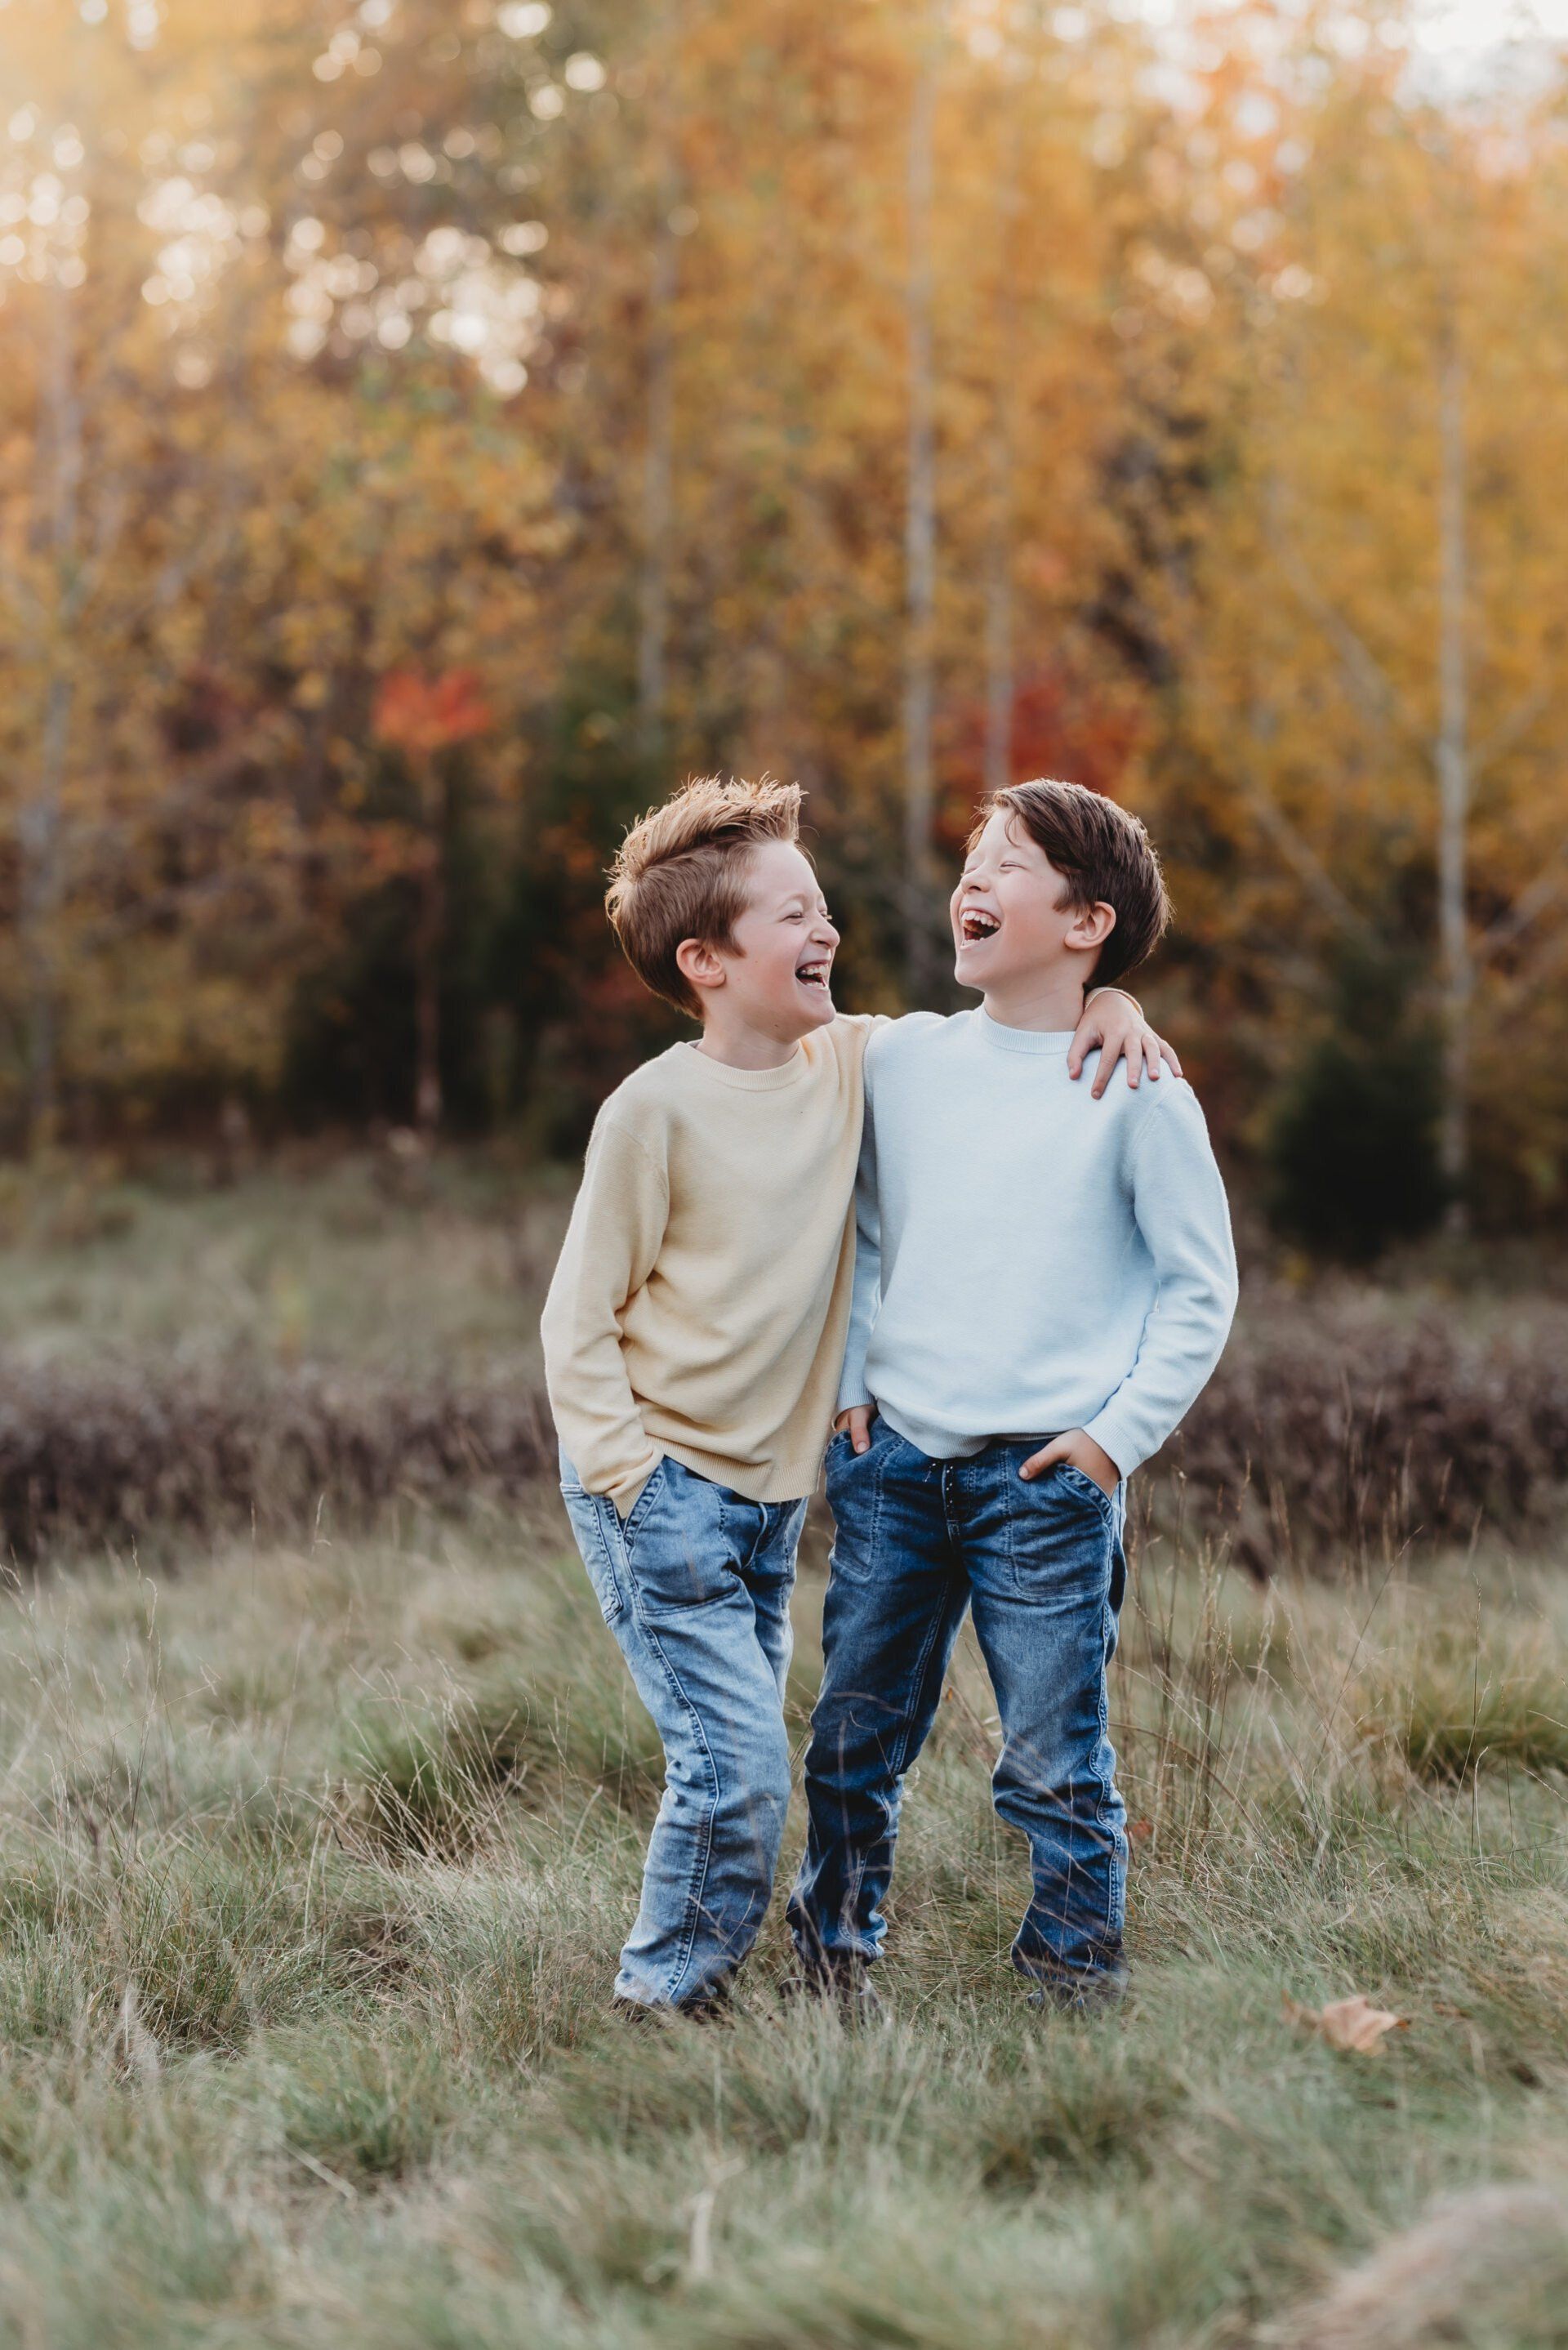 Photo of two brothers with arms over each other's shoulder while walking through grassy field for family photography